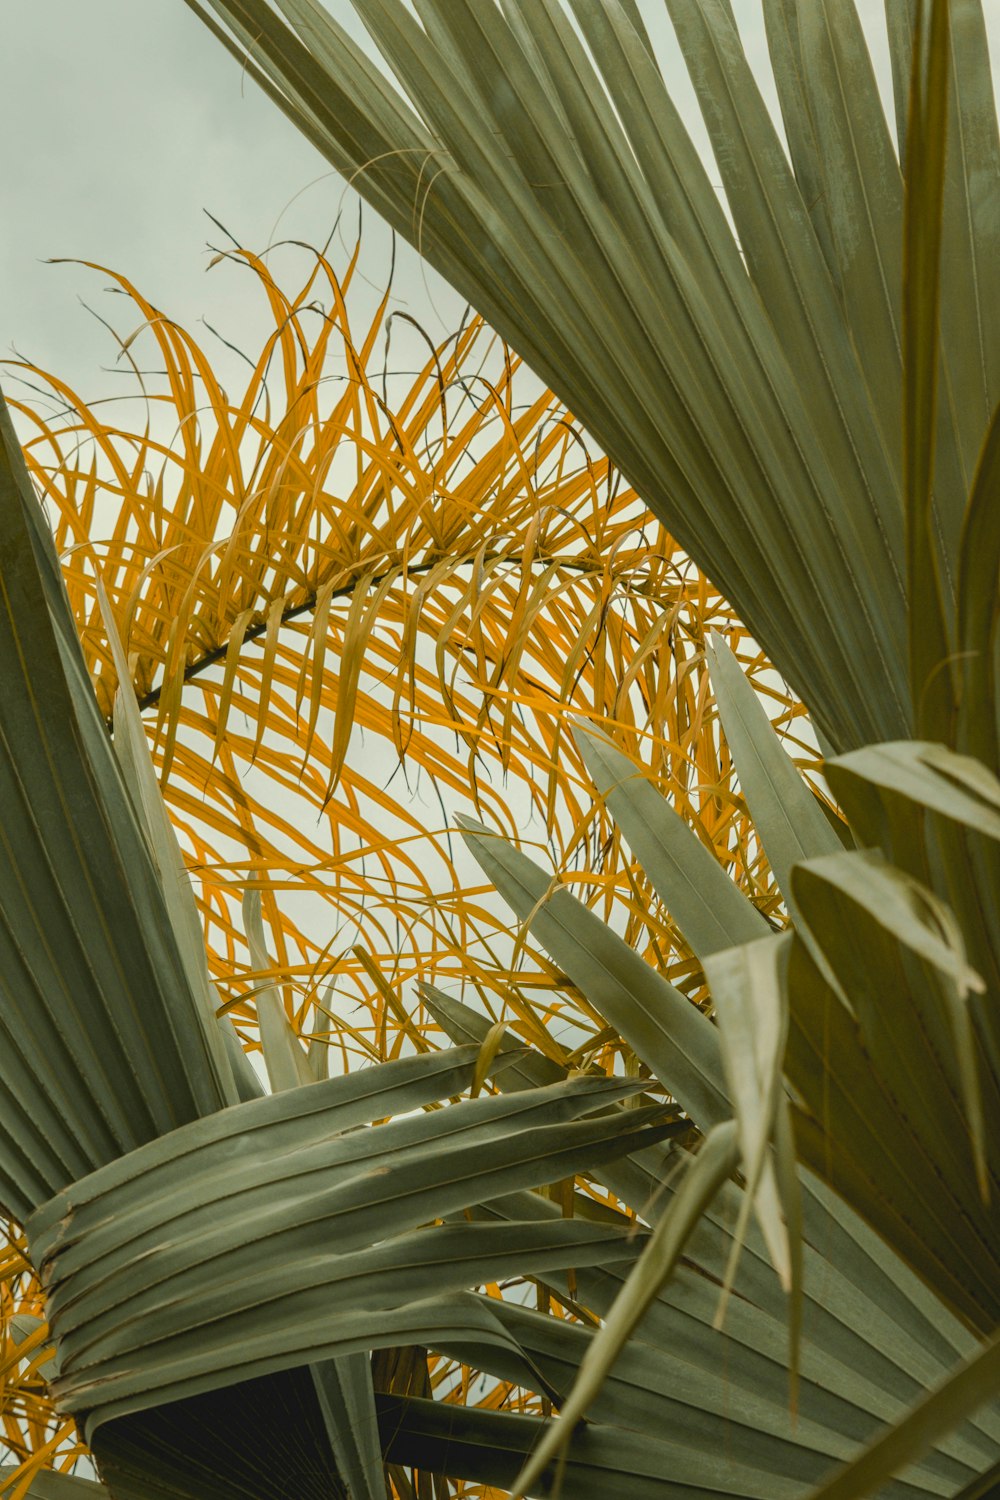 a close up of a palm tree with yellow leaves